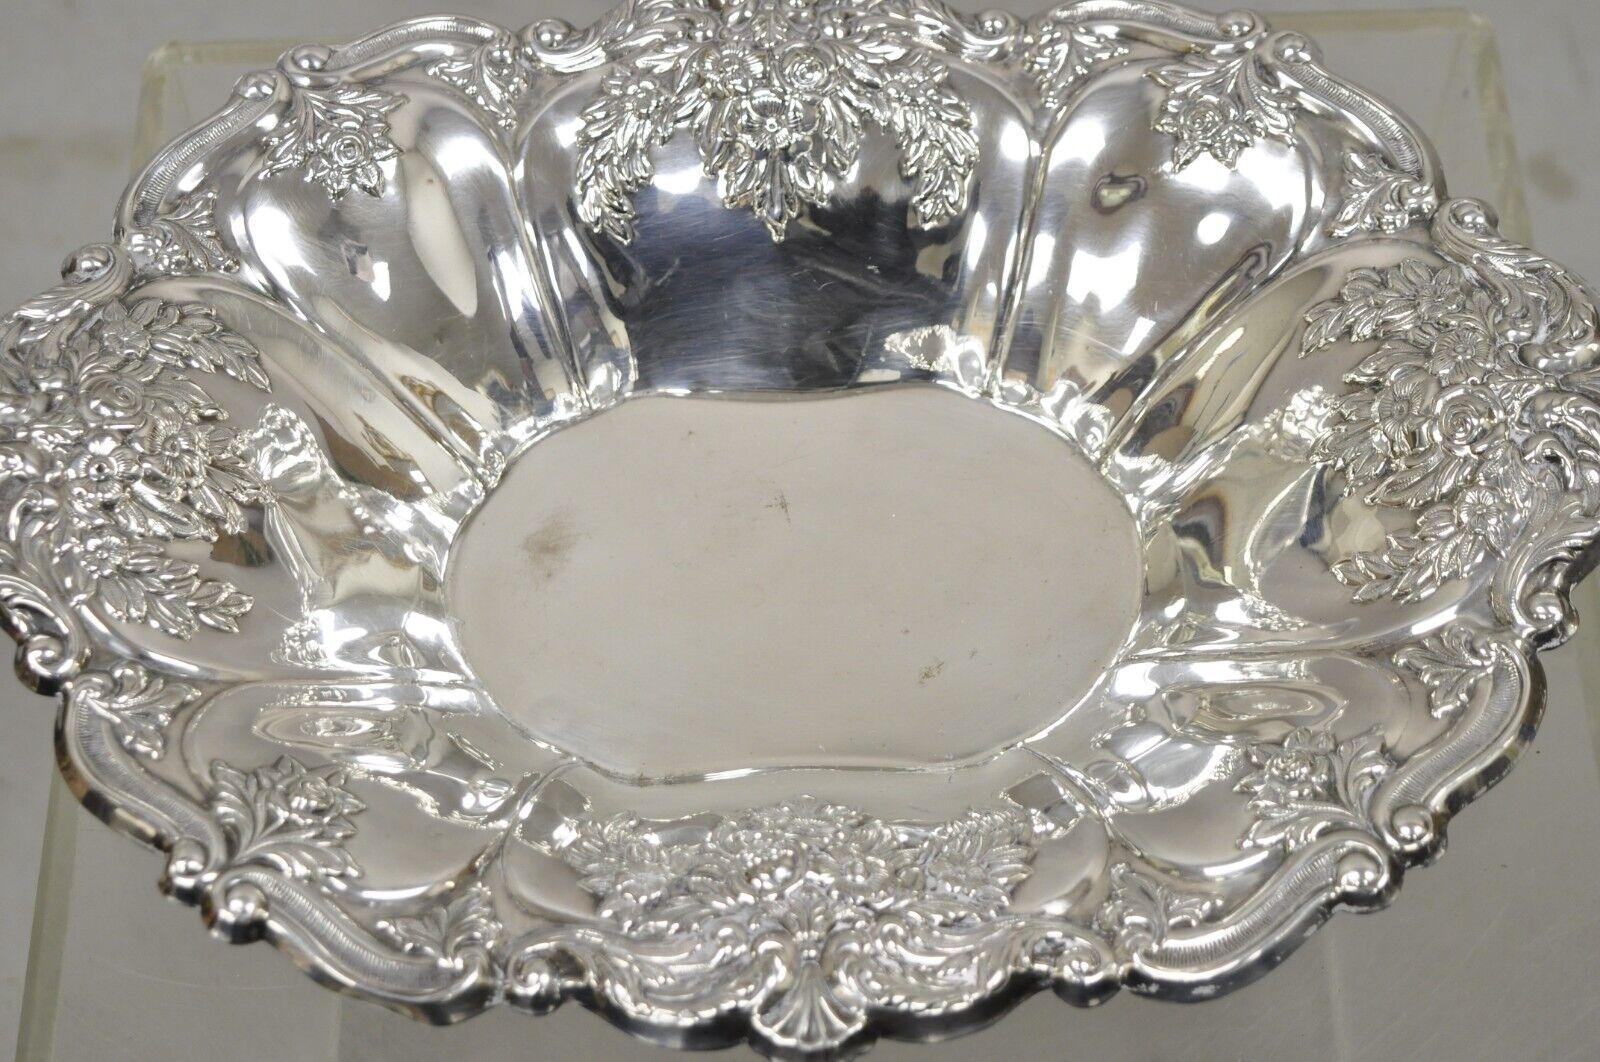 20th Century Victorian Silver Plated Floral Repousse Trinket Dish Serving Bowl Platter For Sale